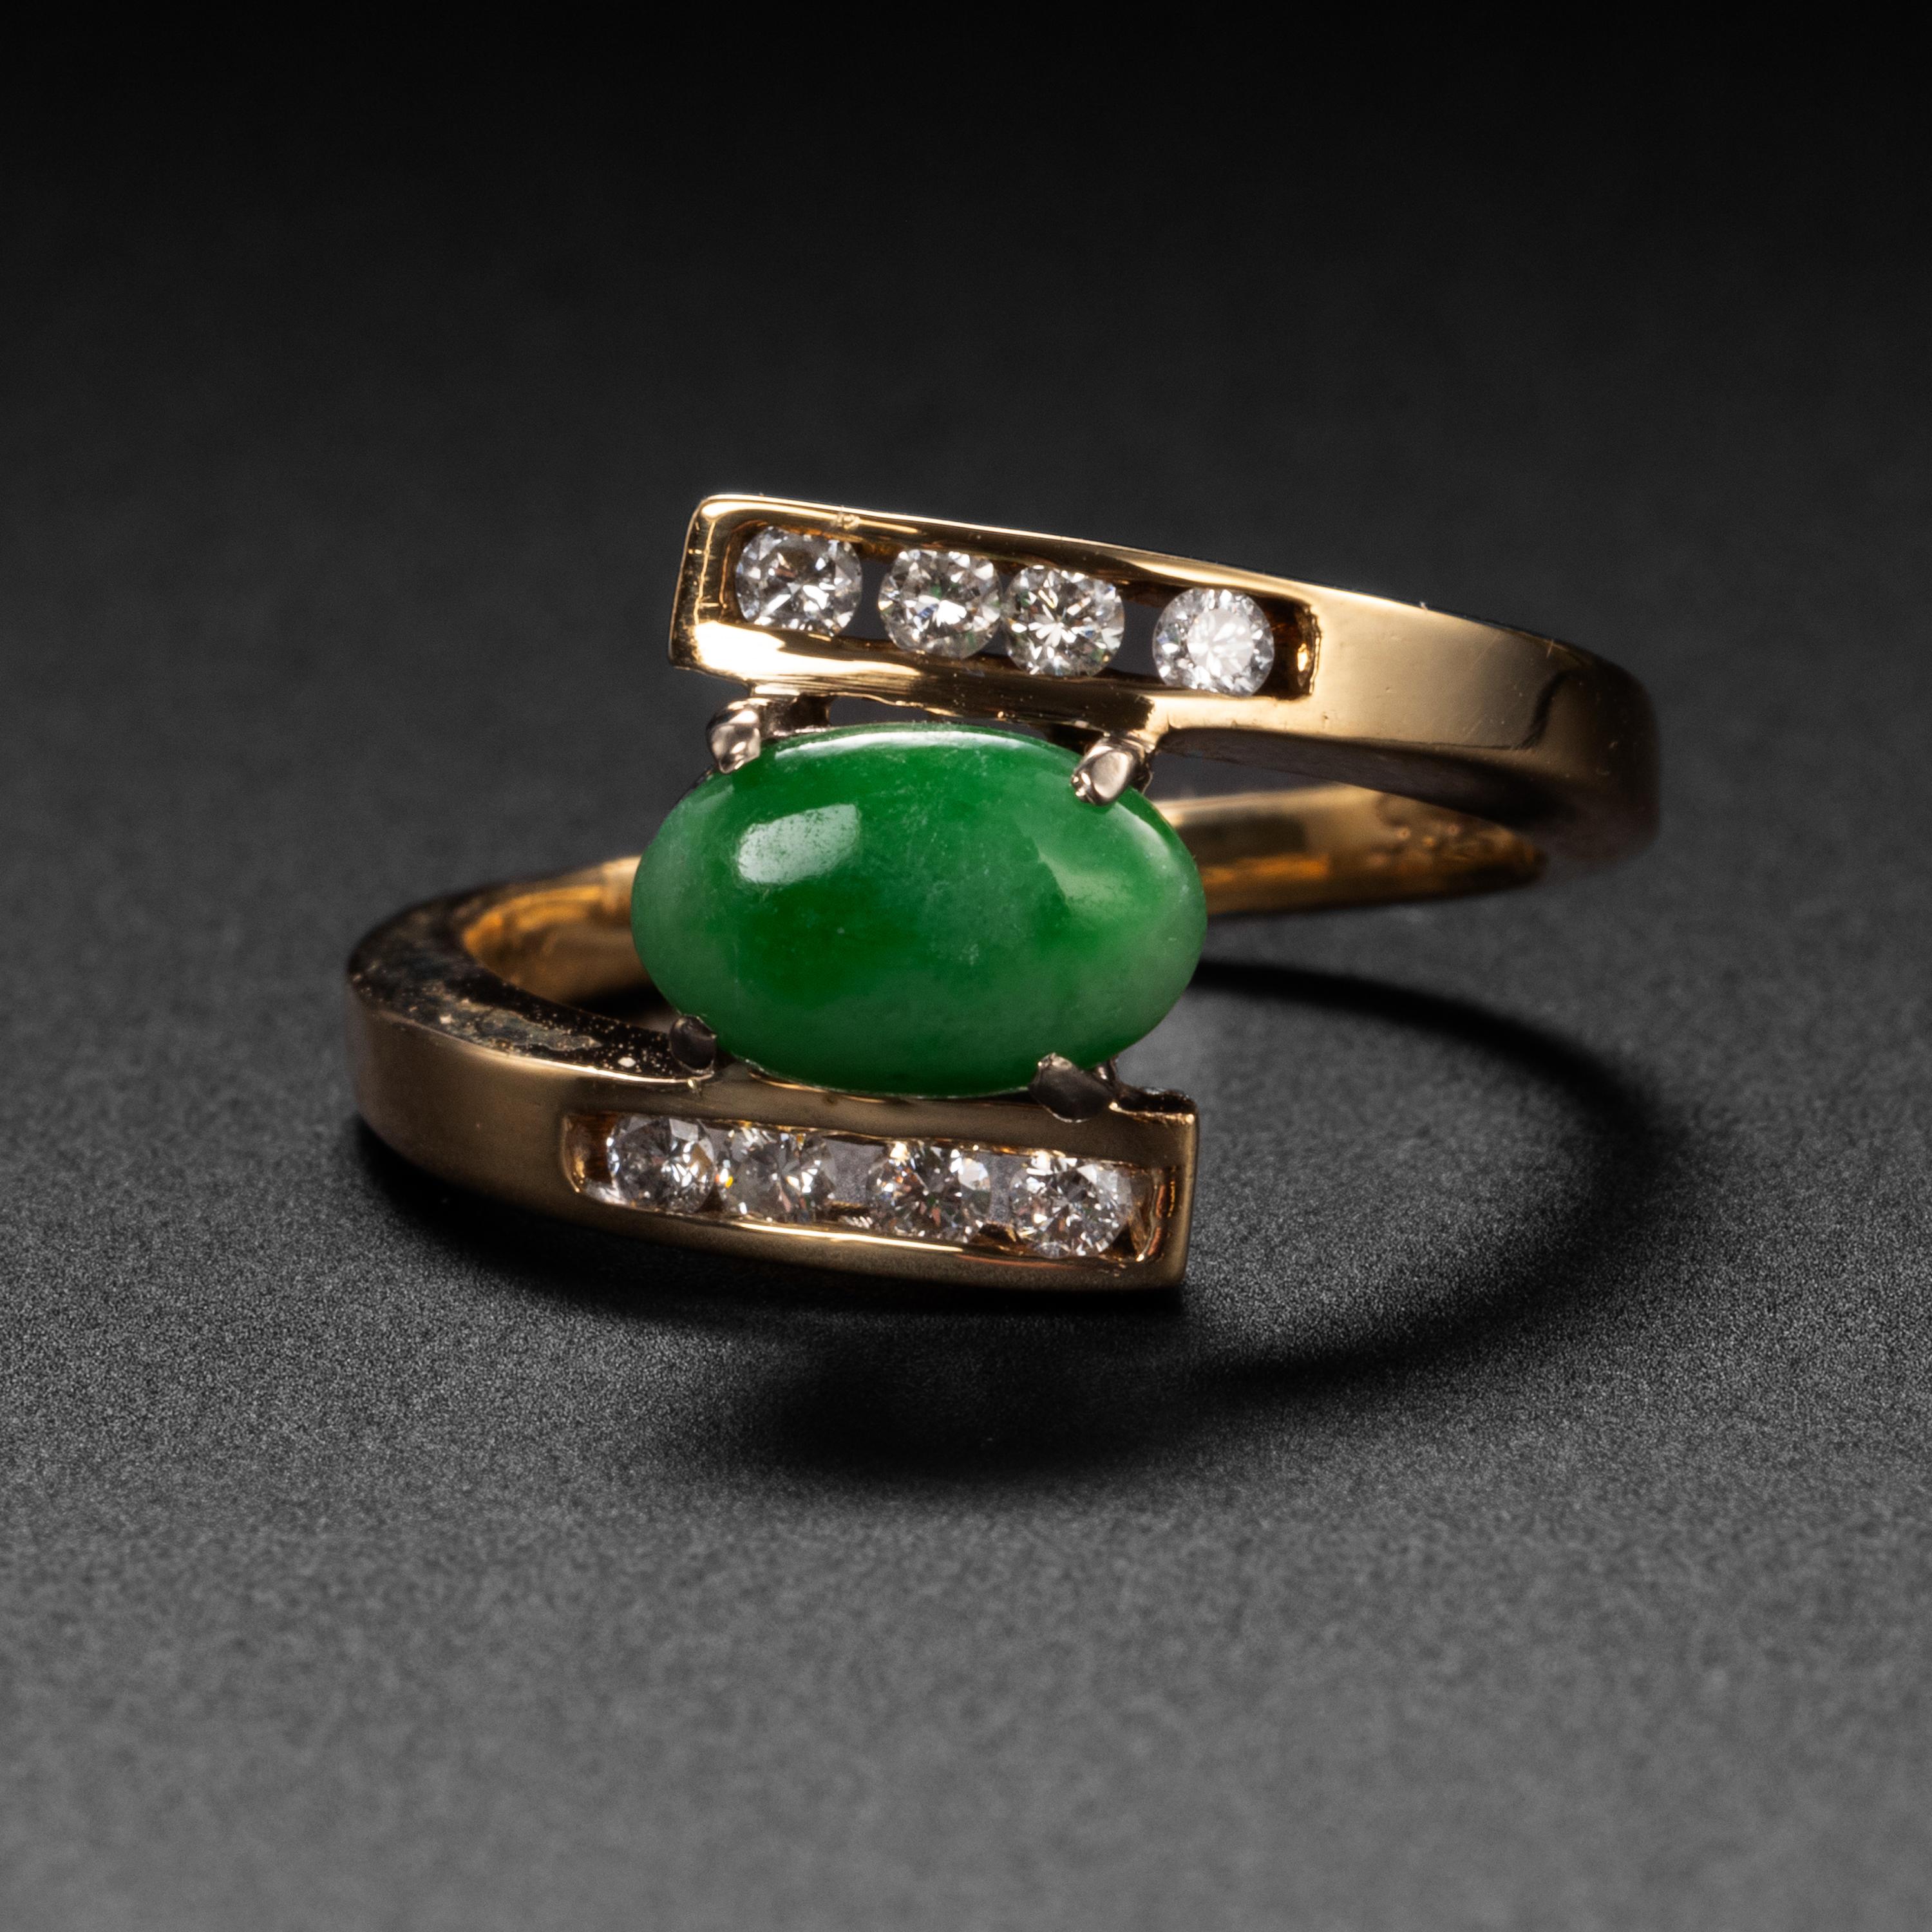 This 1970s-era bypass ring features a central oval cabochon of green jadeite jade, prong-set between the two ends of the 14K yellow gold band. Four .02 carat diamonds are channel-set within the end of the band, adding just a touch of sparkle.

The